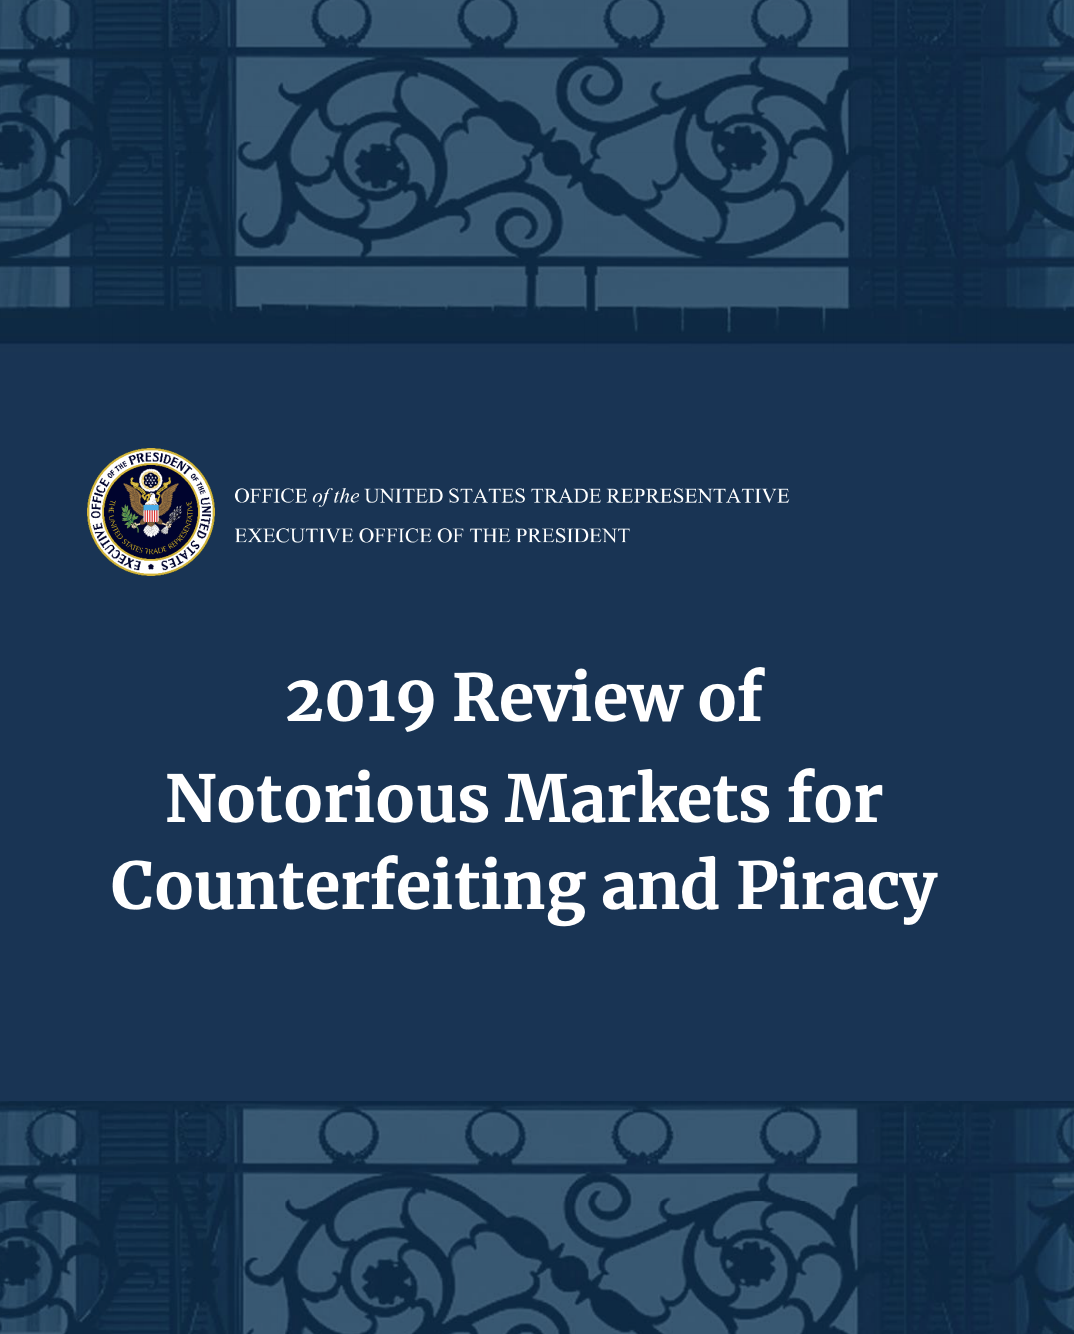 <a href="https://ustr.gov/sites/default/files/2019_Review_of_Notorious_Markets_for_Counterfeiting_and_Piracy.pdf">Last year's <br><em>Notorious Markets</em> report</a>.